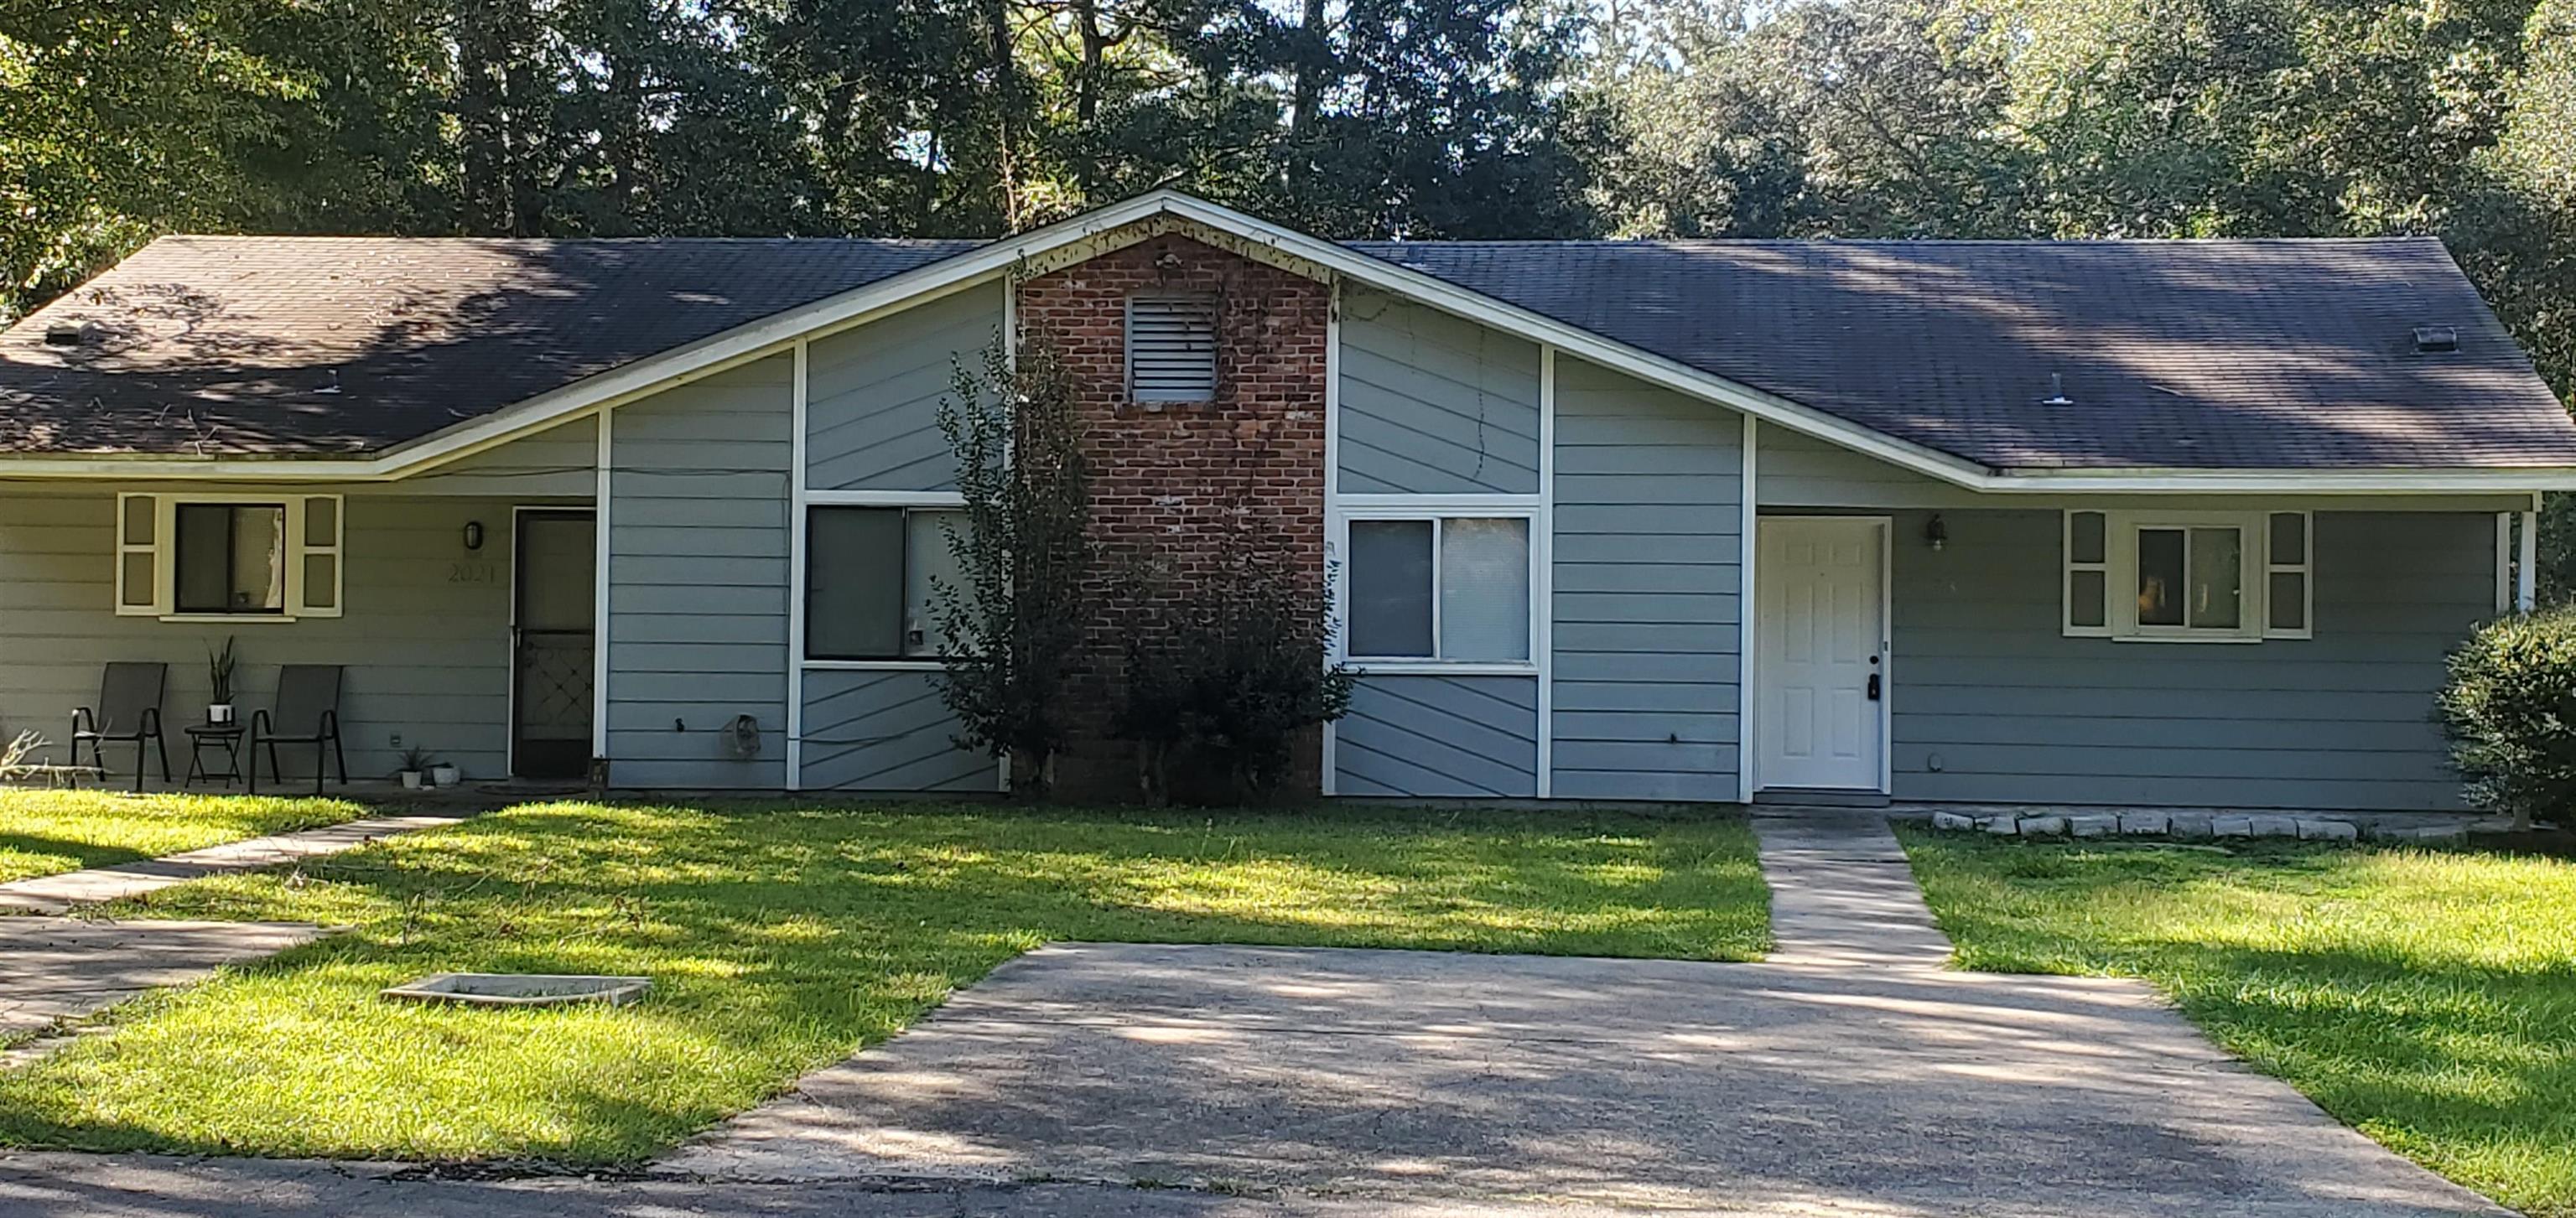 2 bedroom with 2 full baths townhouse in great location close to FSU,TCC, & FAMU.  Nice large fenced in backyard. This unit is occupied with a tenant that would like to stay but has no lease.. NEW ROOF!!